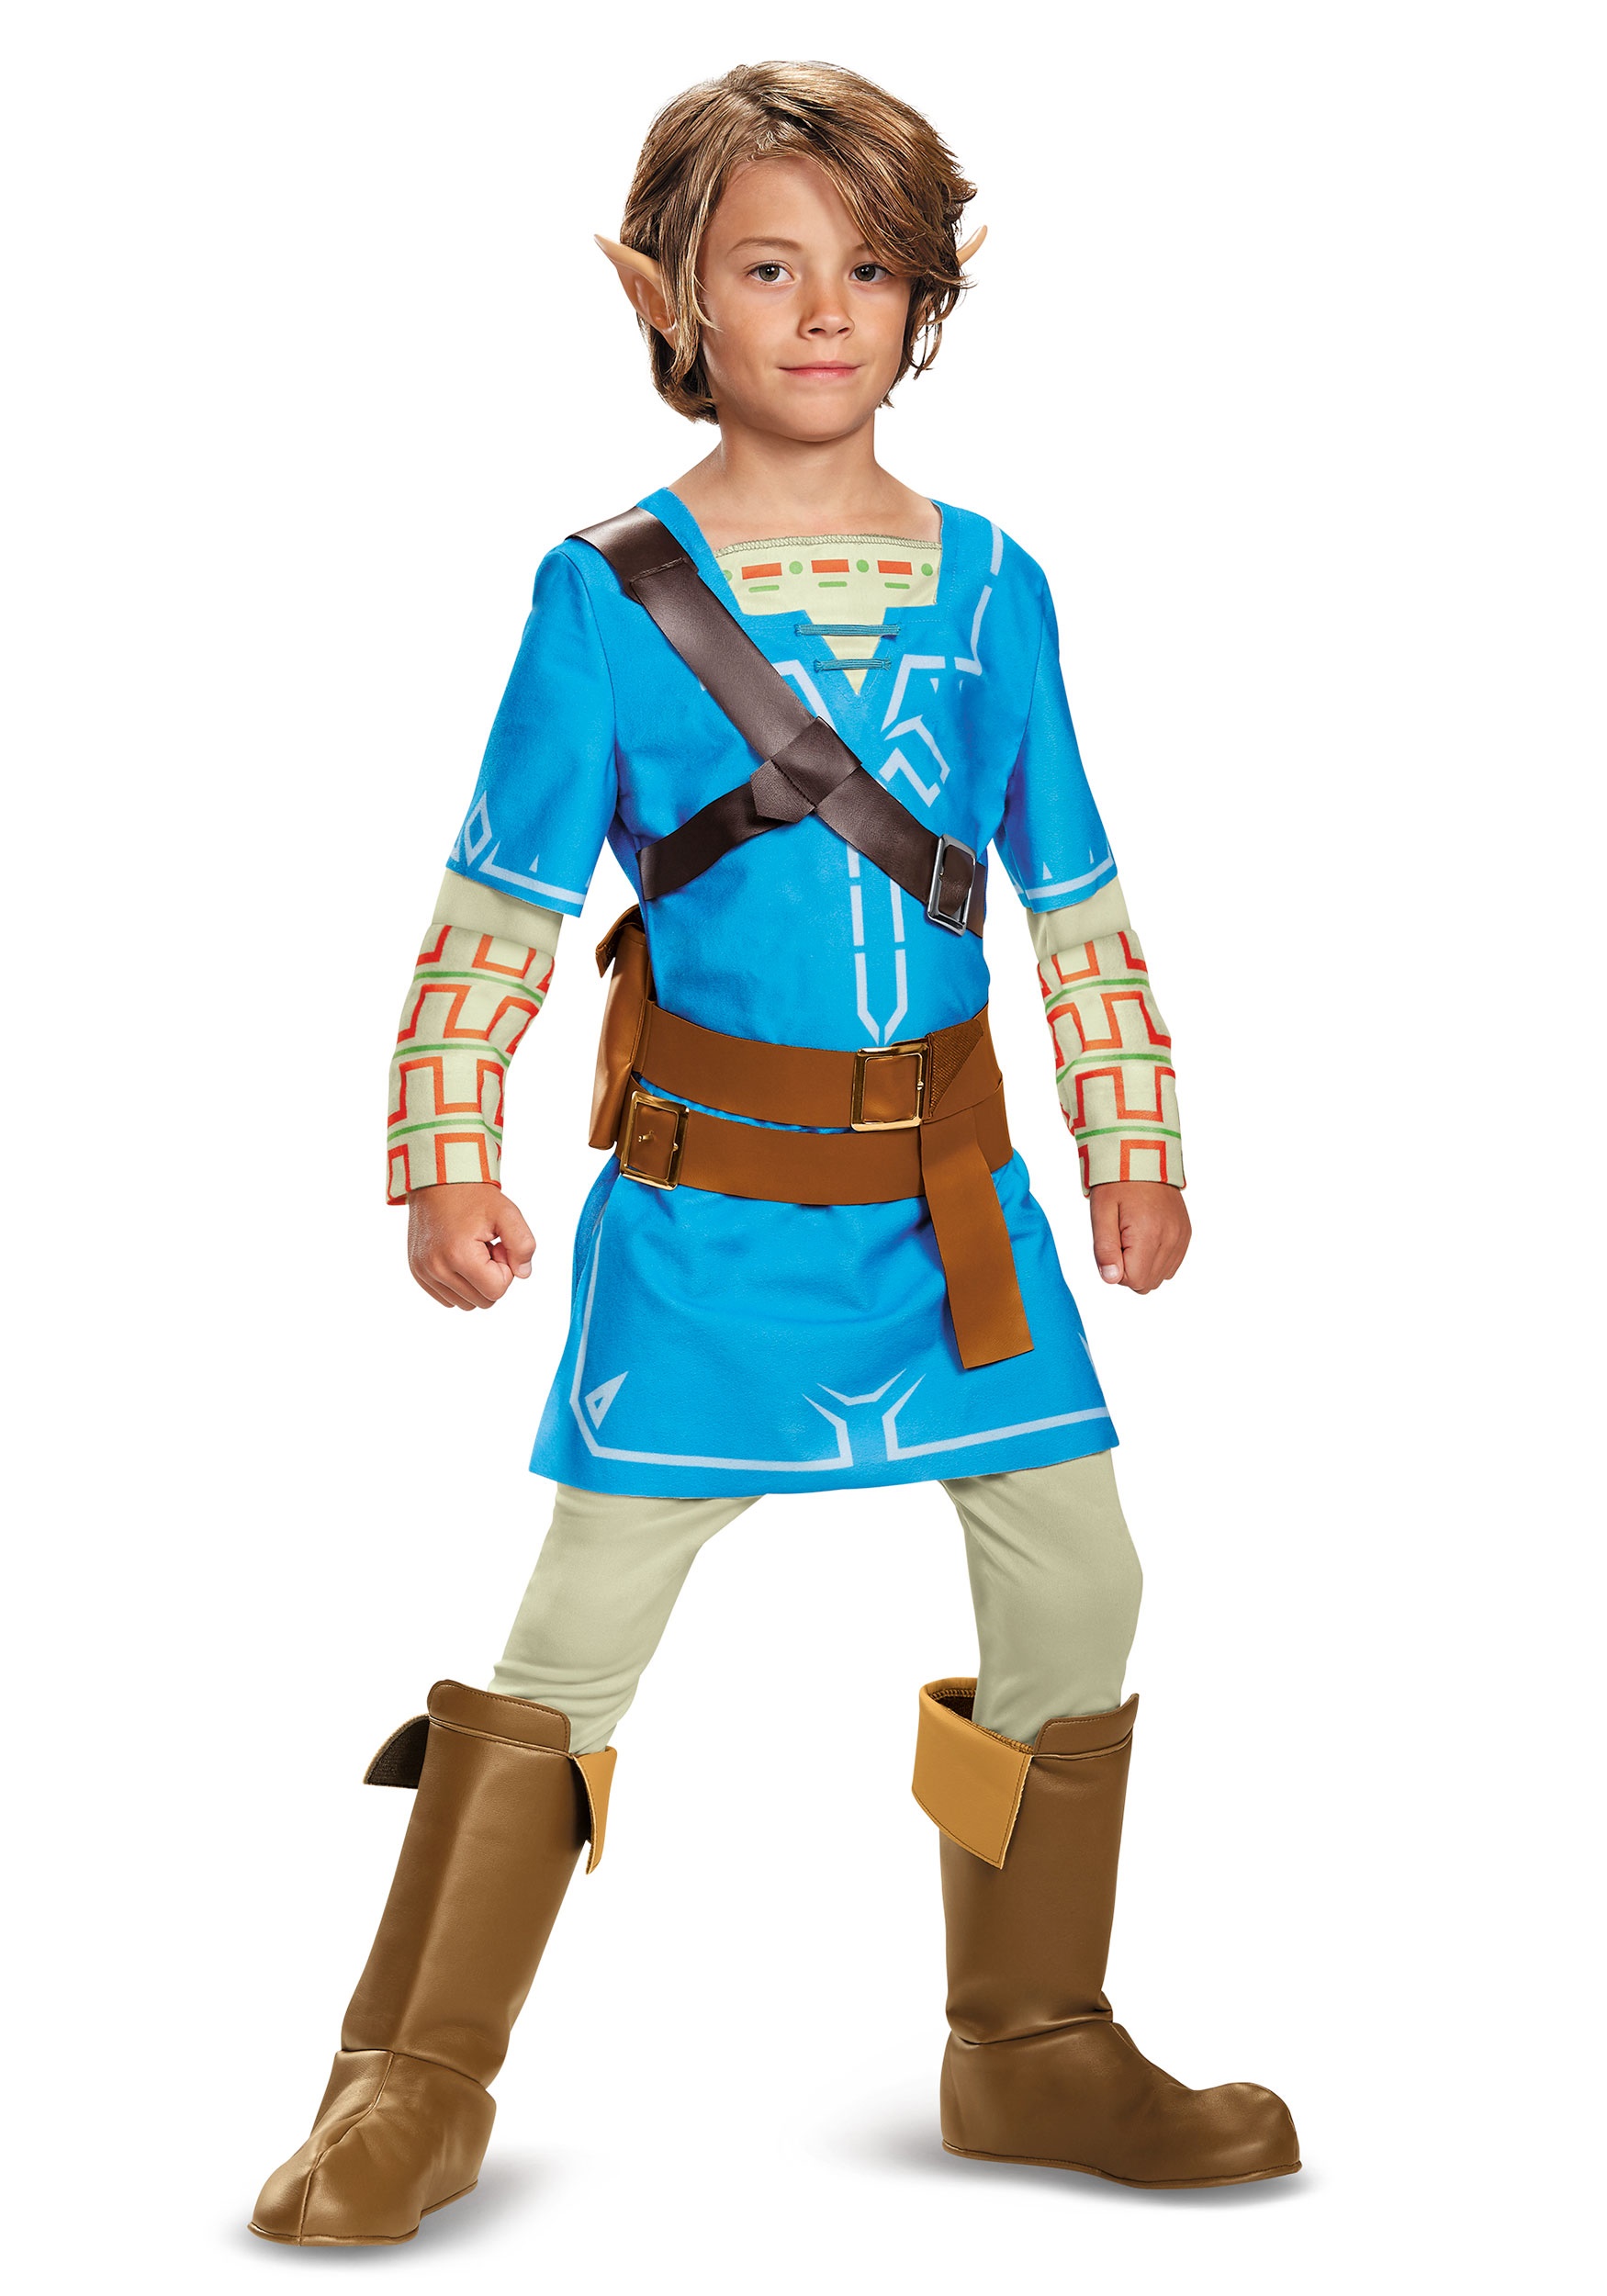 Photos - Fancy Dress Legend Disguise Link Breath of the Wild Deluxe Costume for Kids Brown/Blue DI 